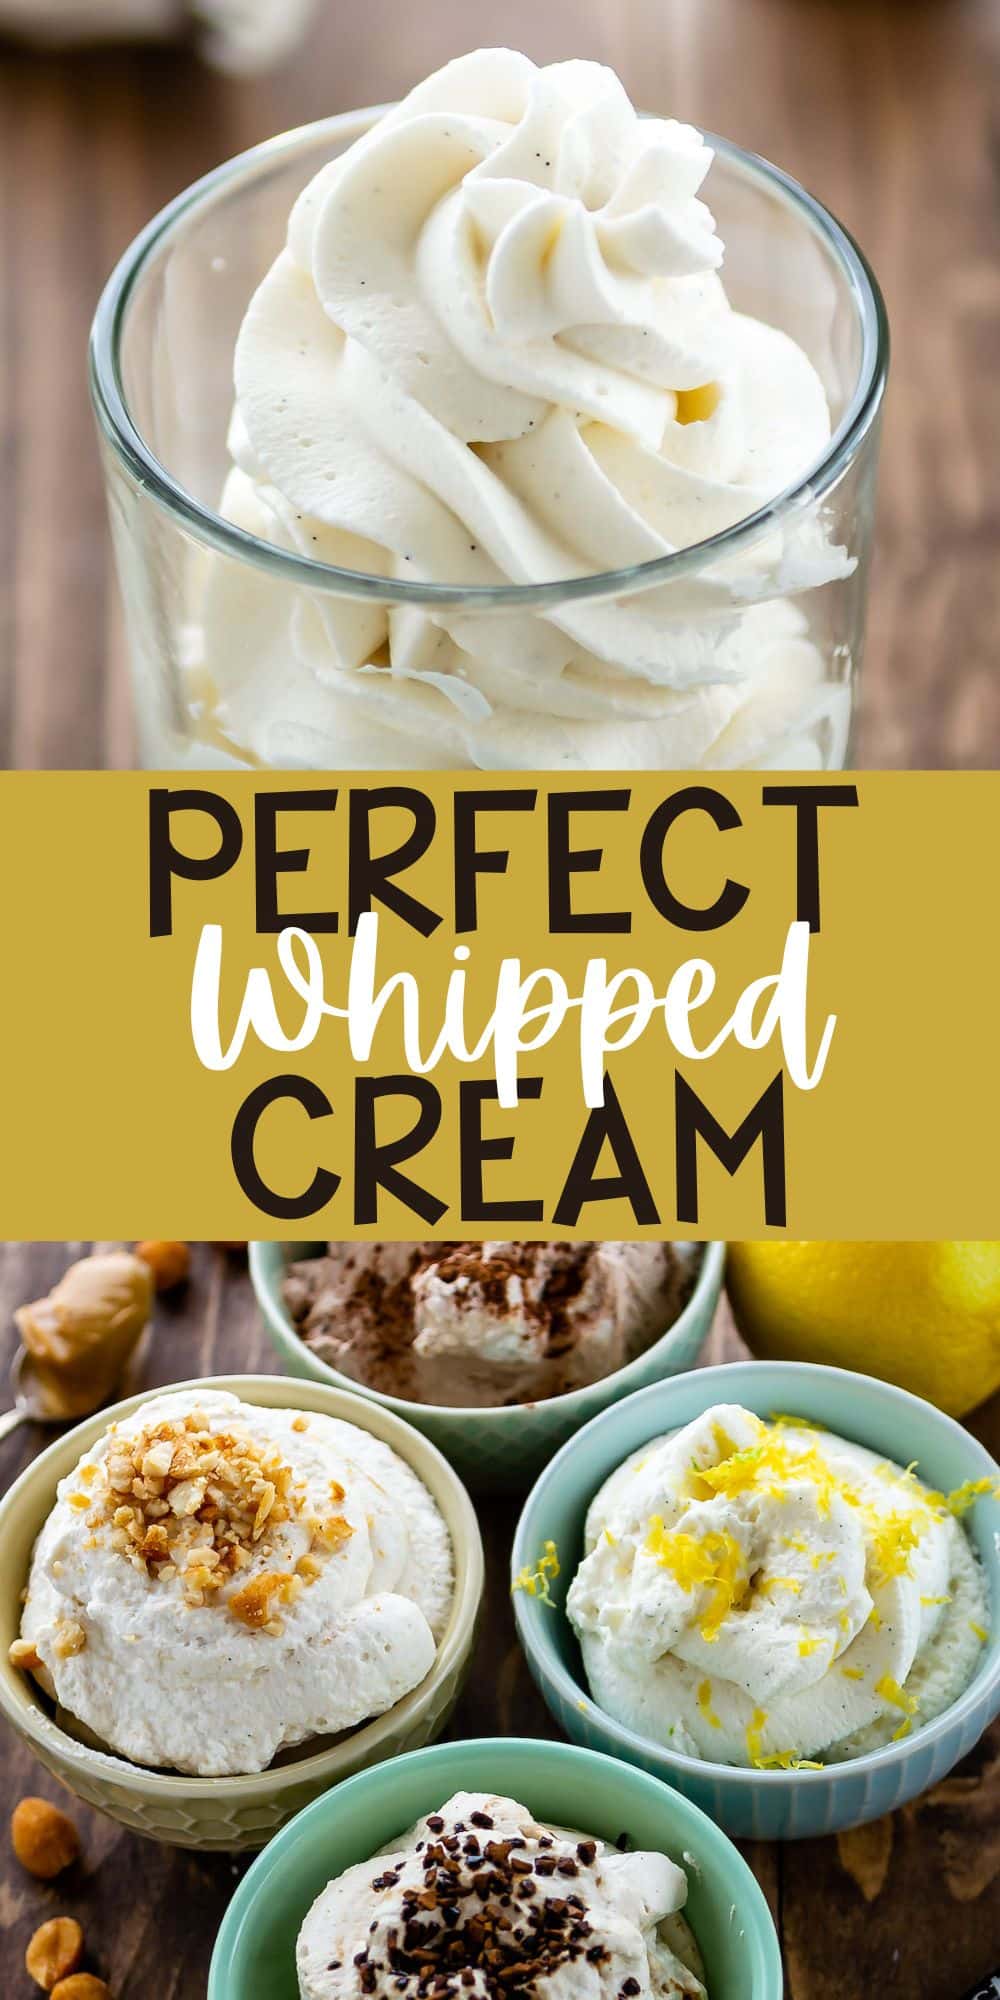 two photos of whipped cream in a clear jar with words on the image.